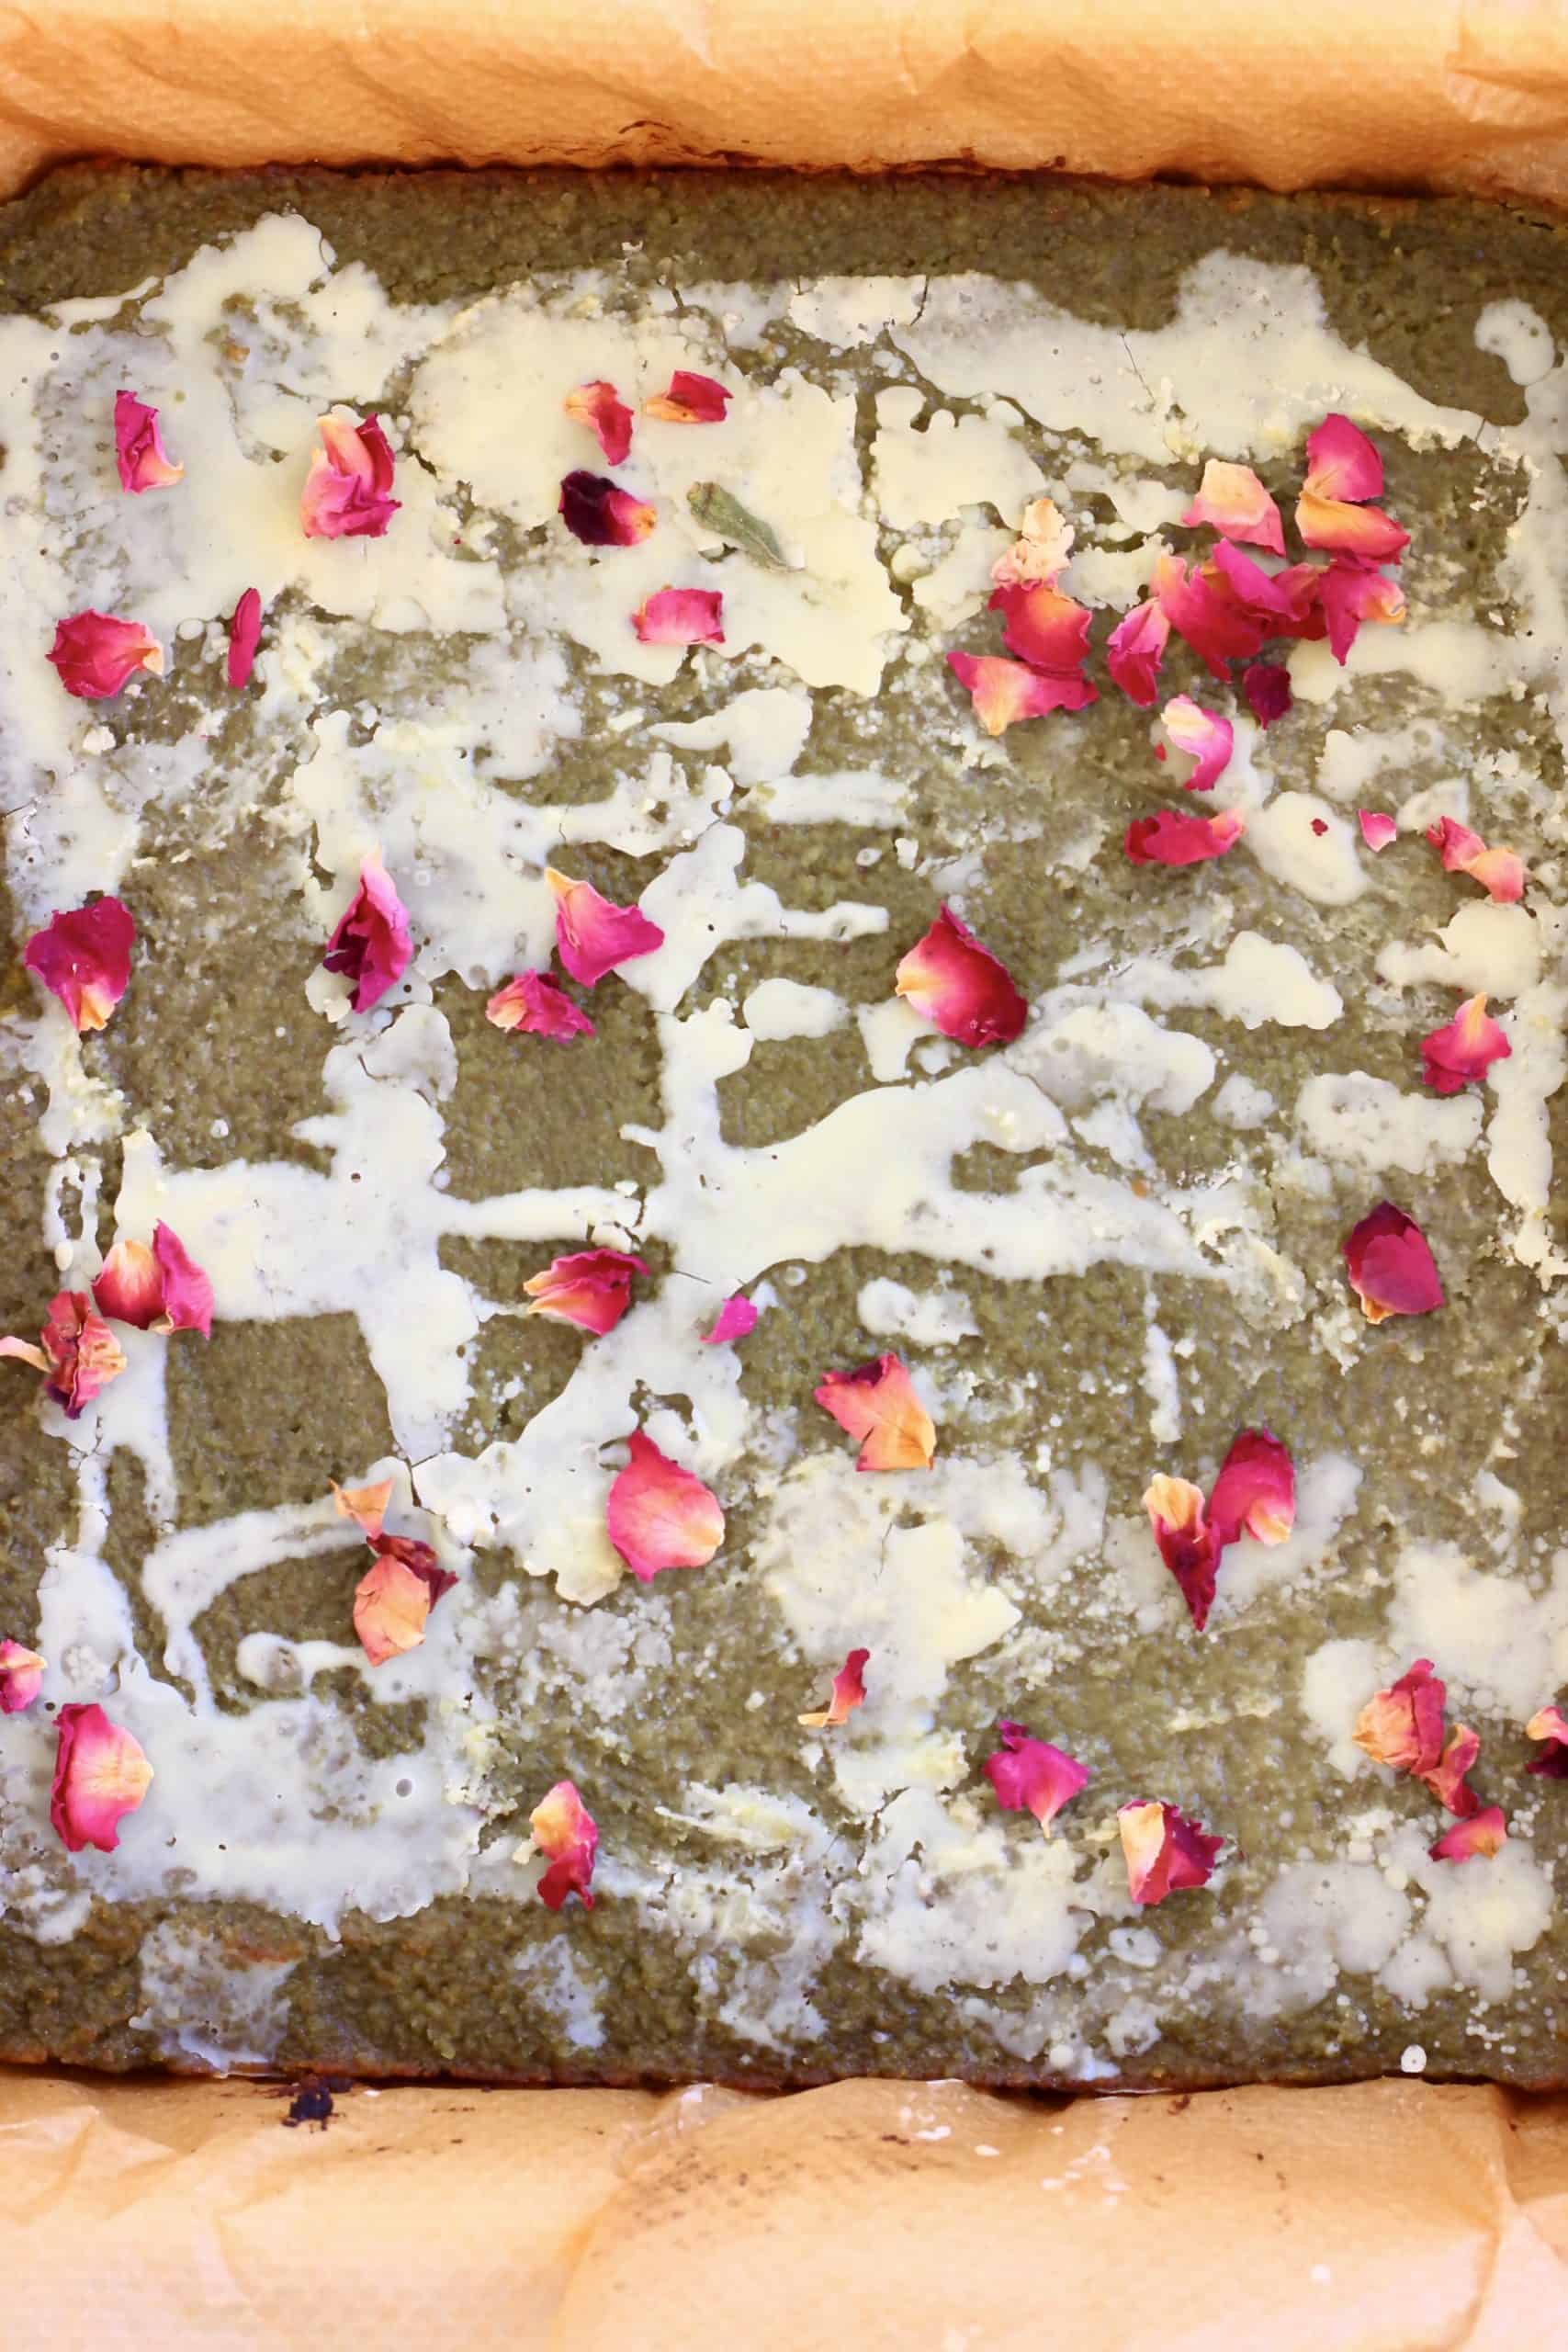 Gluten-free vegan matcha brownies drizzled with white chocolate glaze and decorated with rose petals